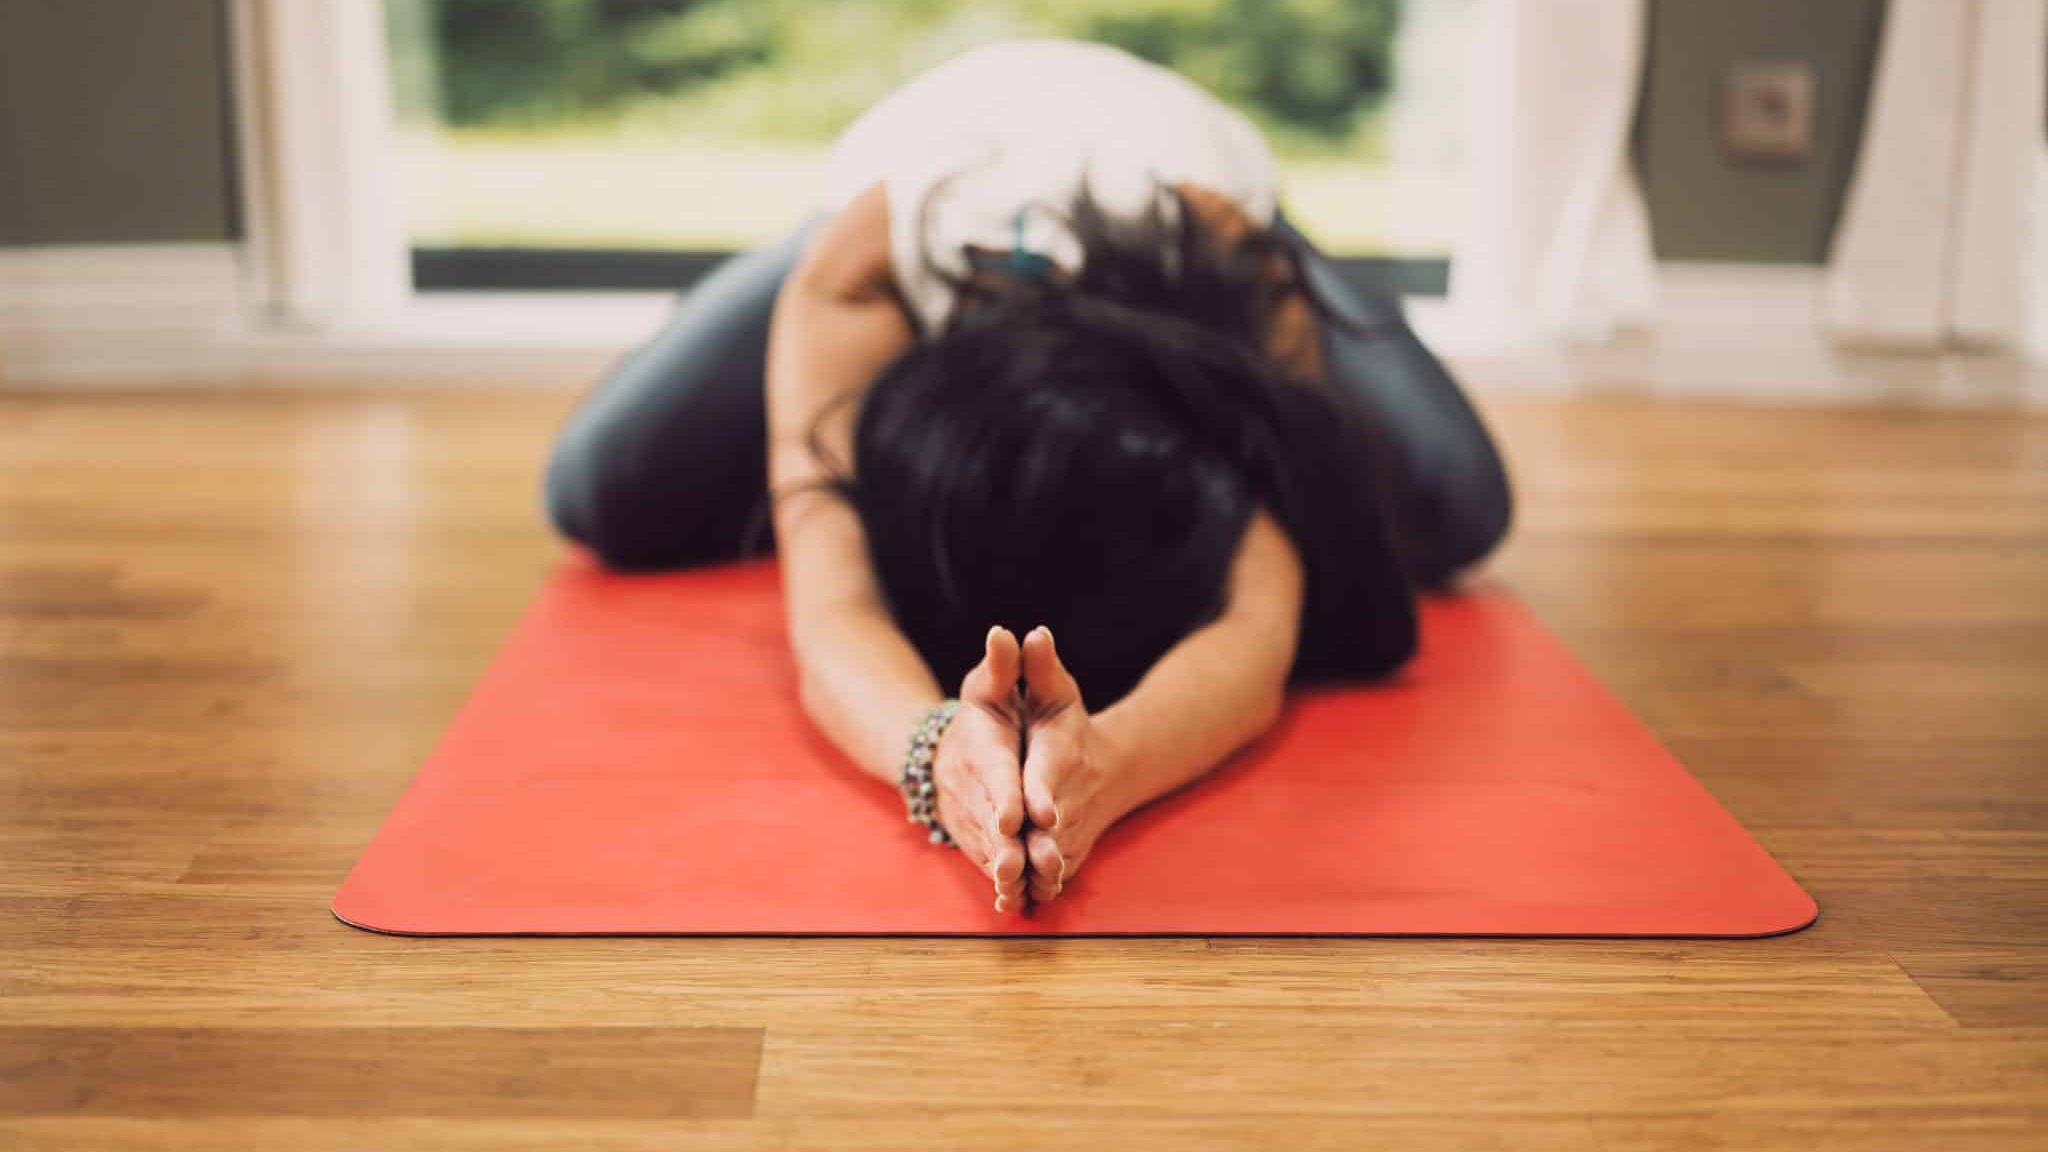 Yoga treatment for stress and anxiety?